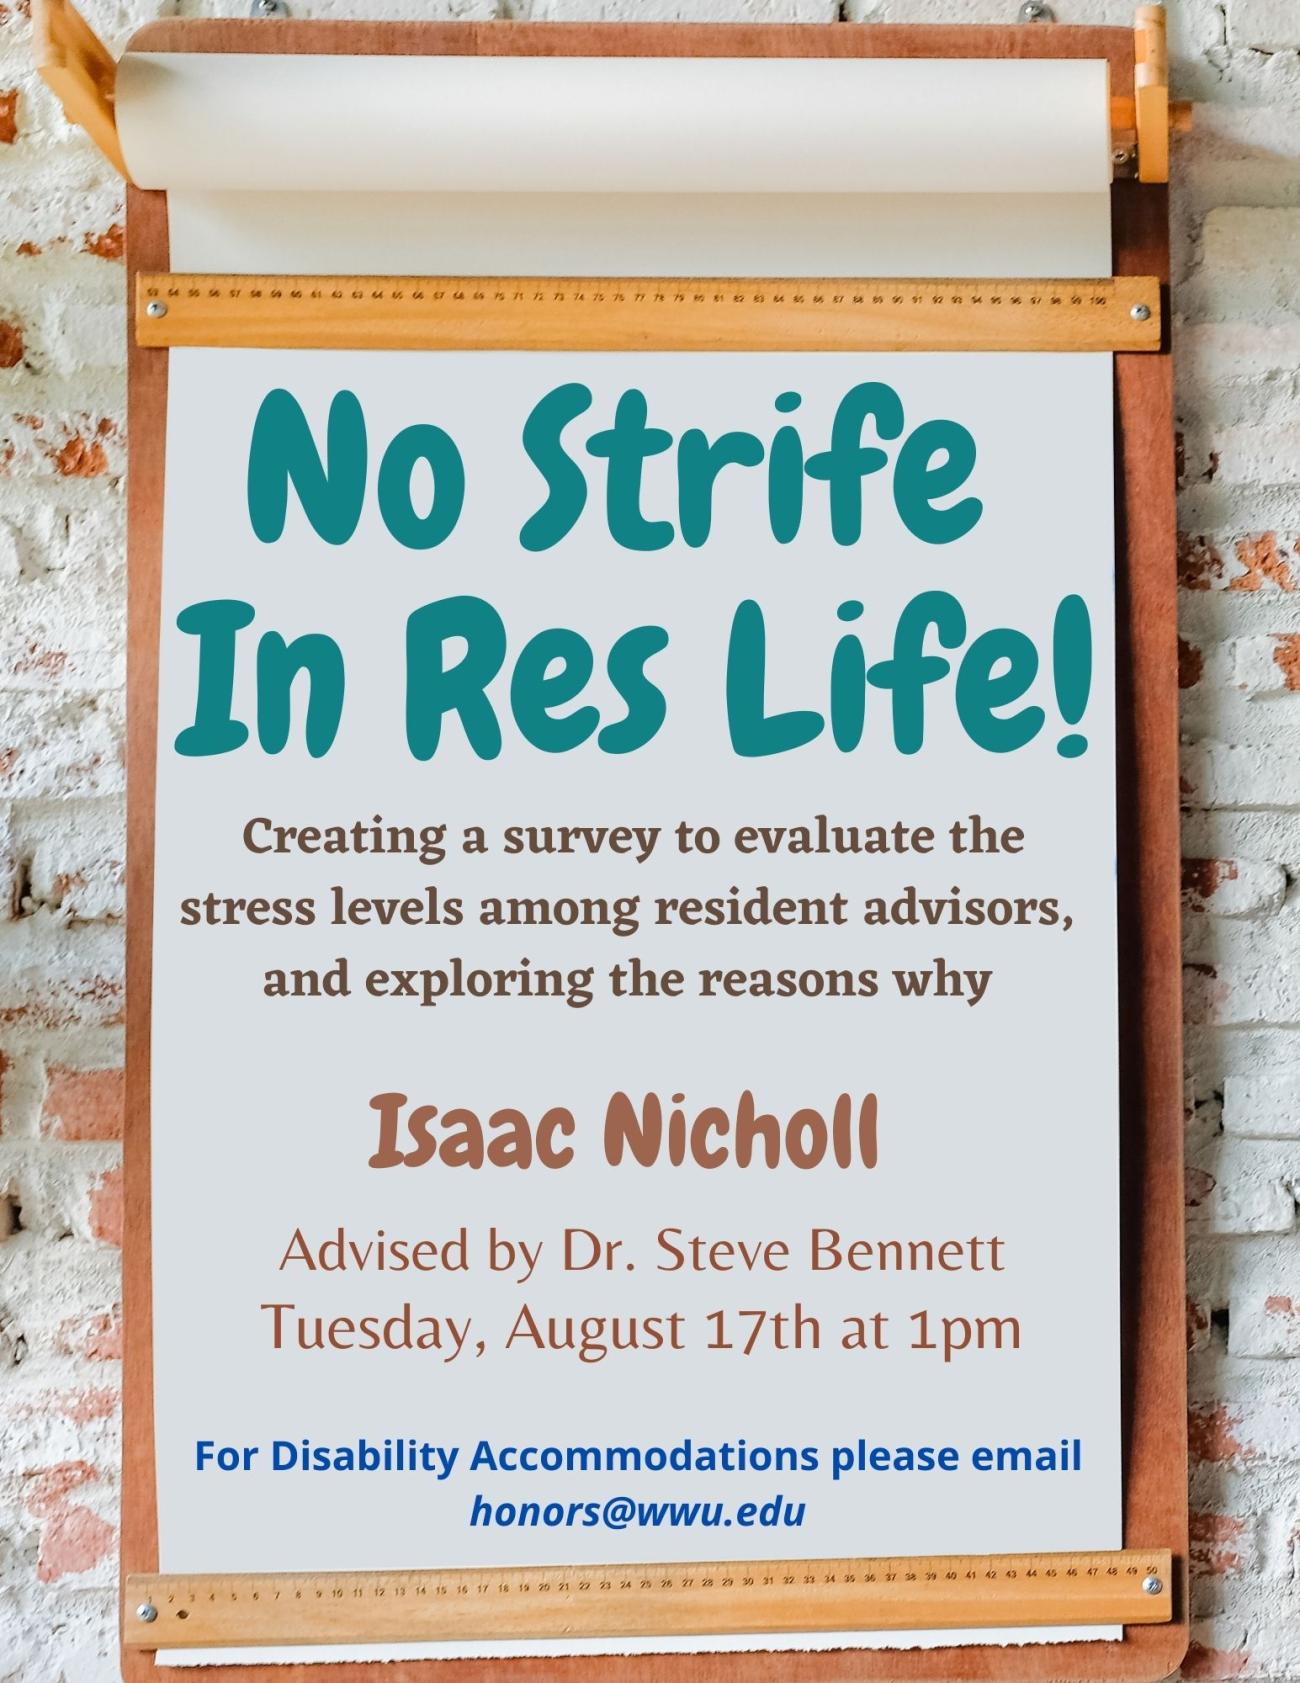 "No Strife in Res Life!"  Creating a survey to evaluate the stress levels among resident advisors, and exploring the reasons why.  Isaac Nicholl  Advised by Dr. Seteve Bennett  Tuesday, August 17th at 1pm  For Disability Accomodations please email honors@wwu.edu